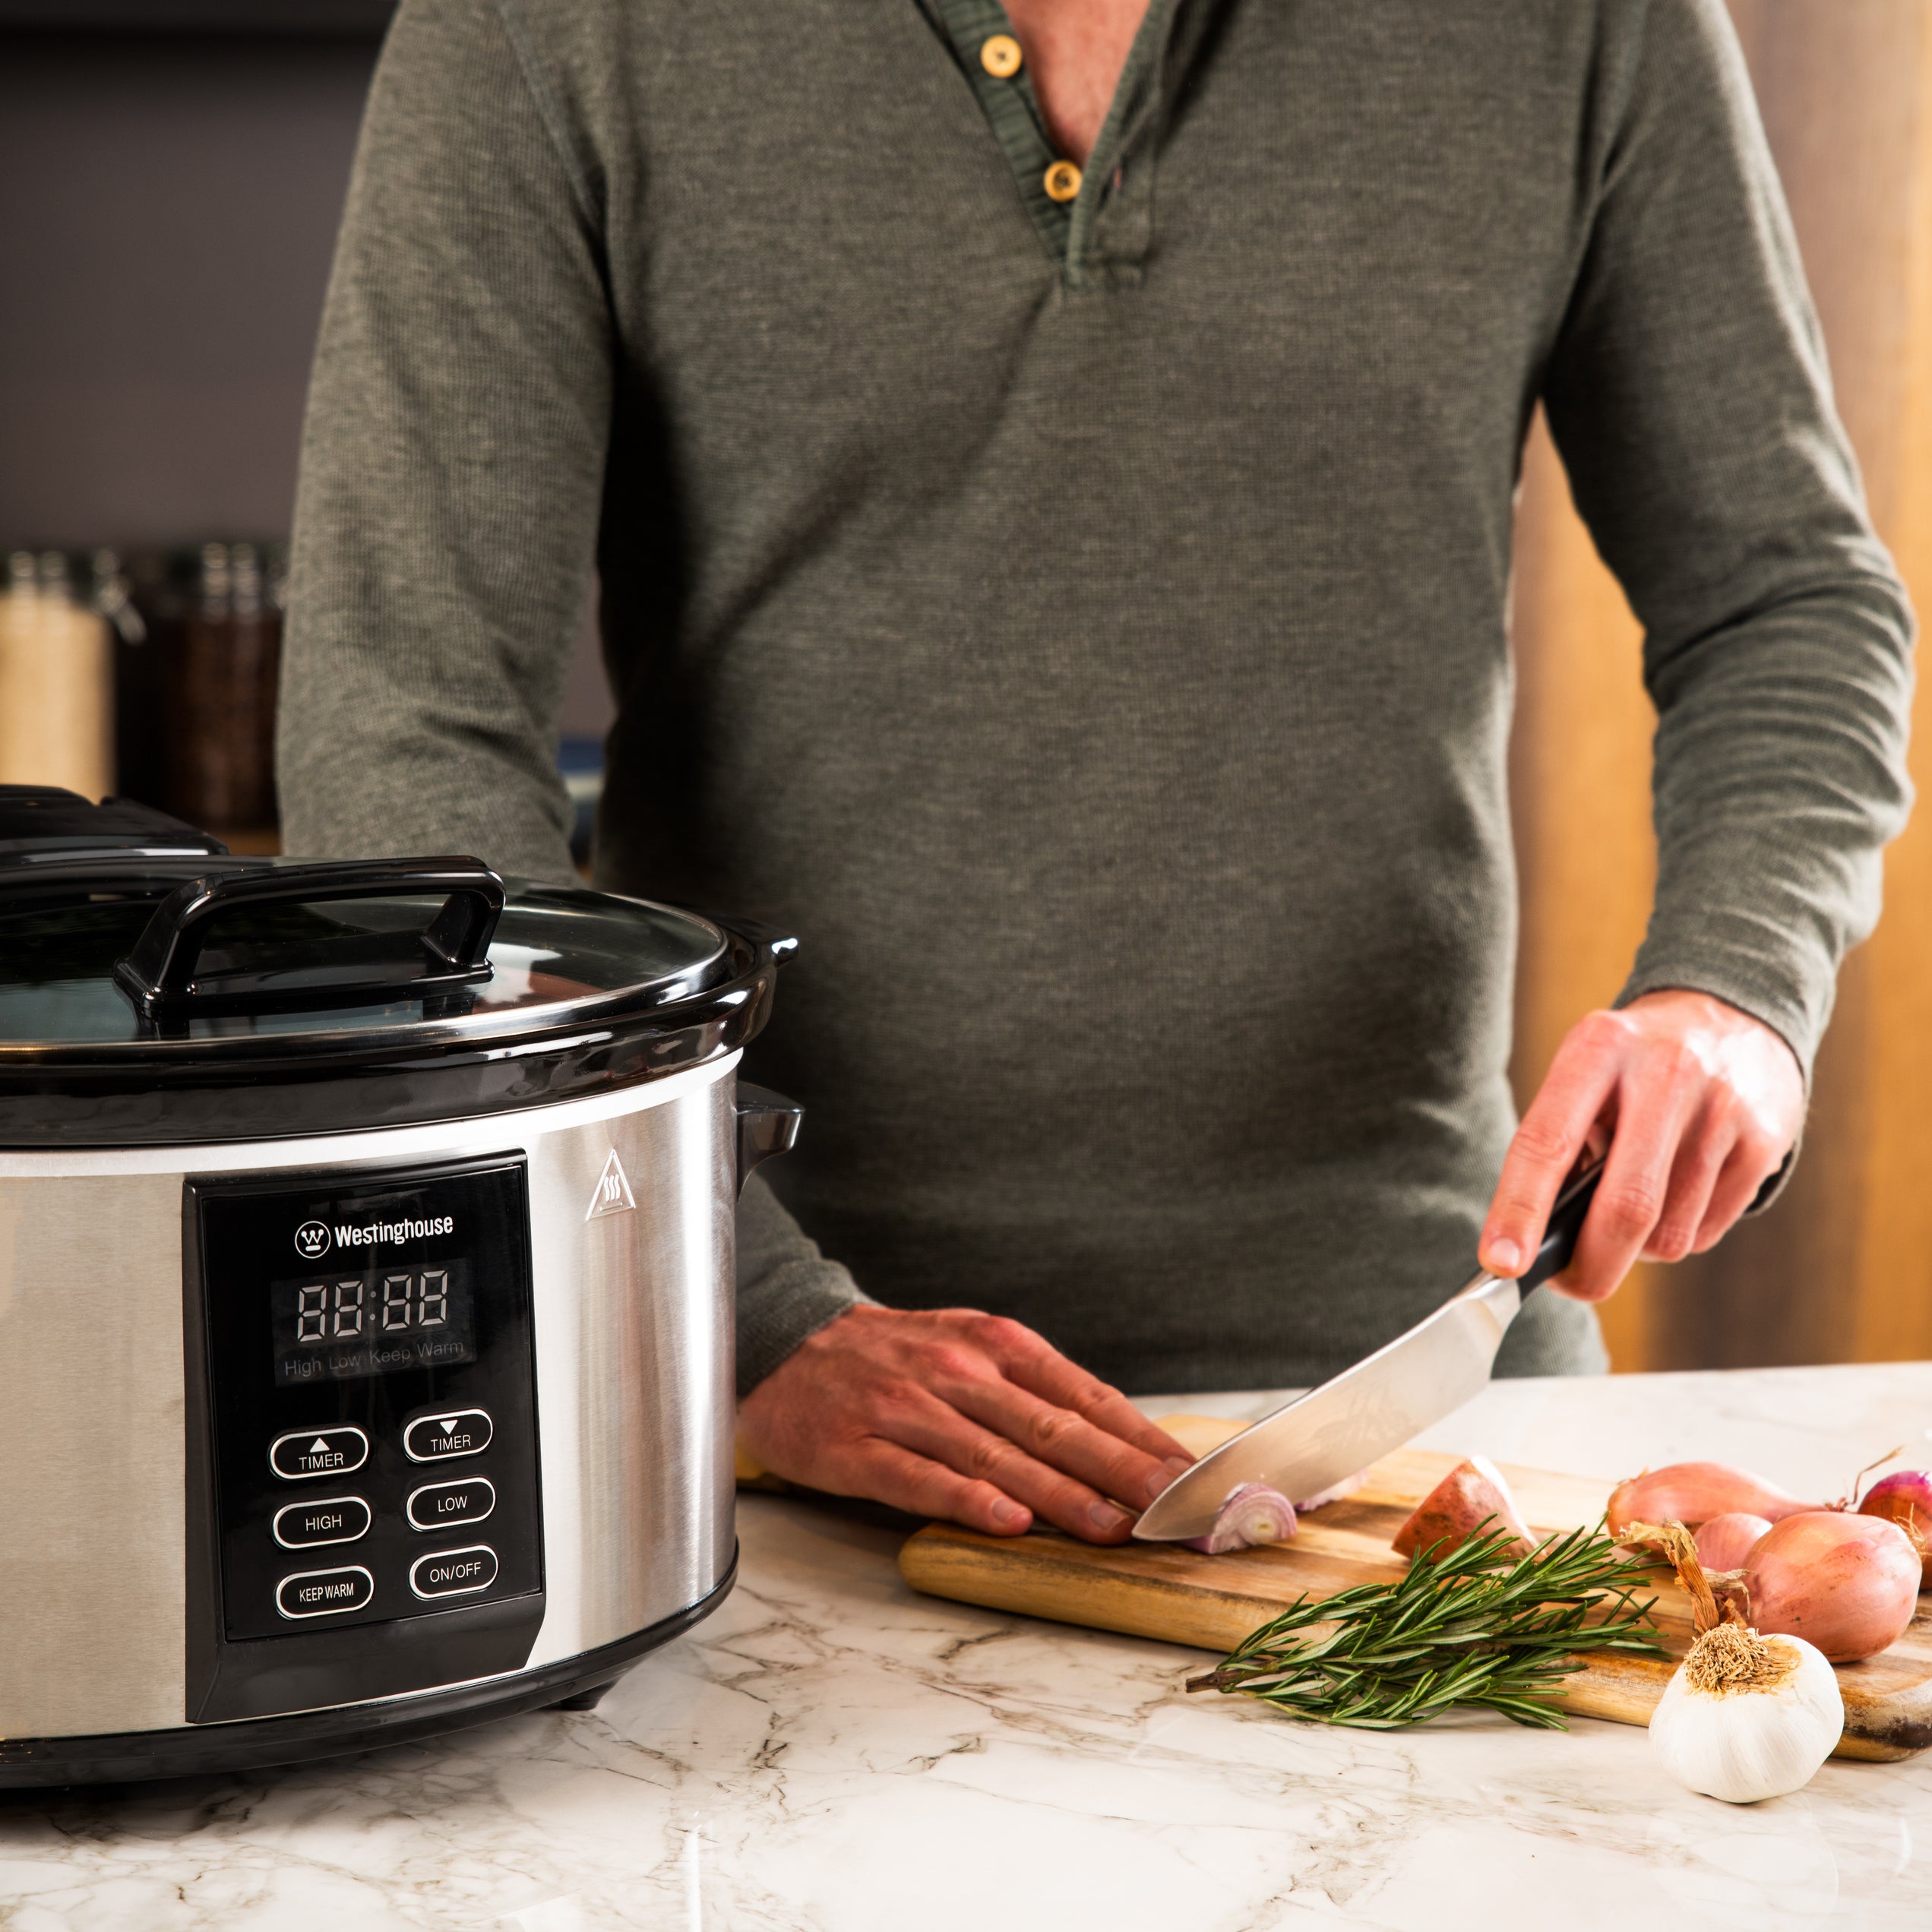 Smith & Nobel 6L Slow Cooker Stainless Steel IA3712